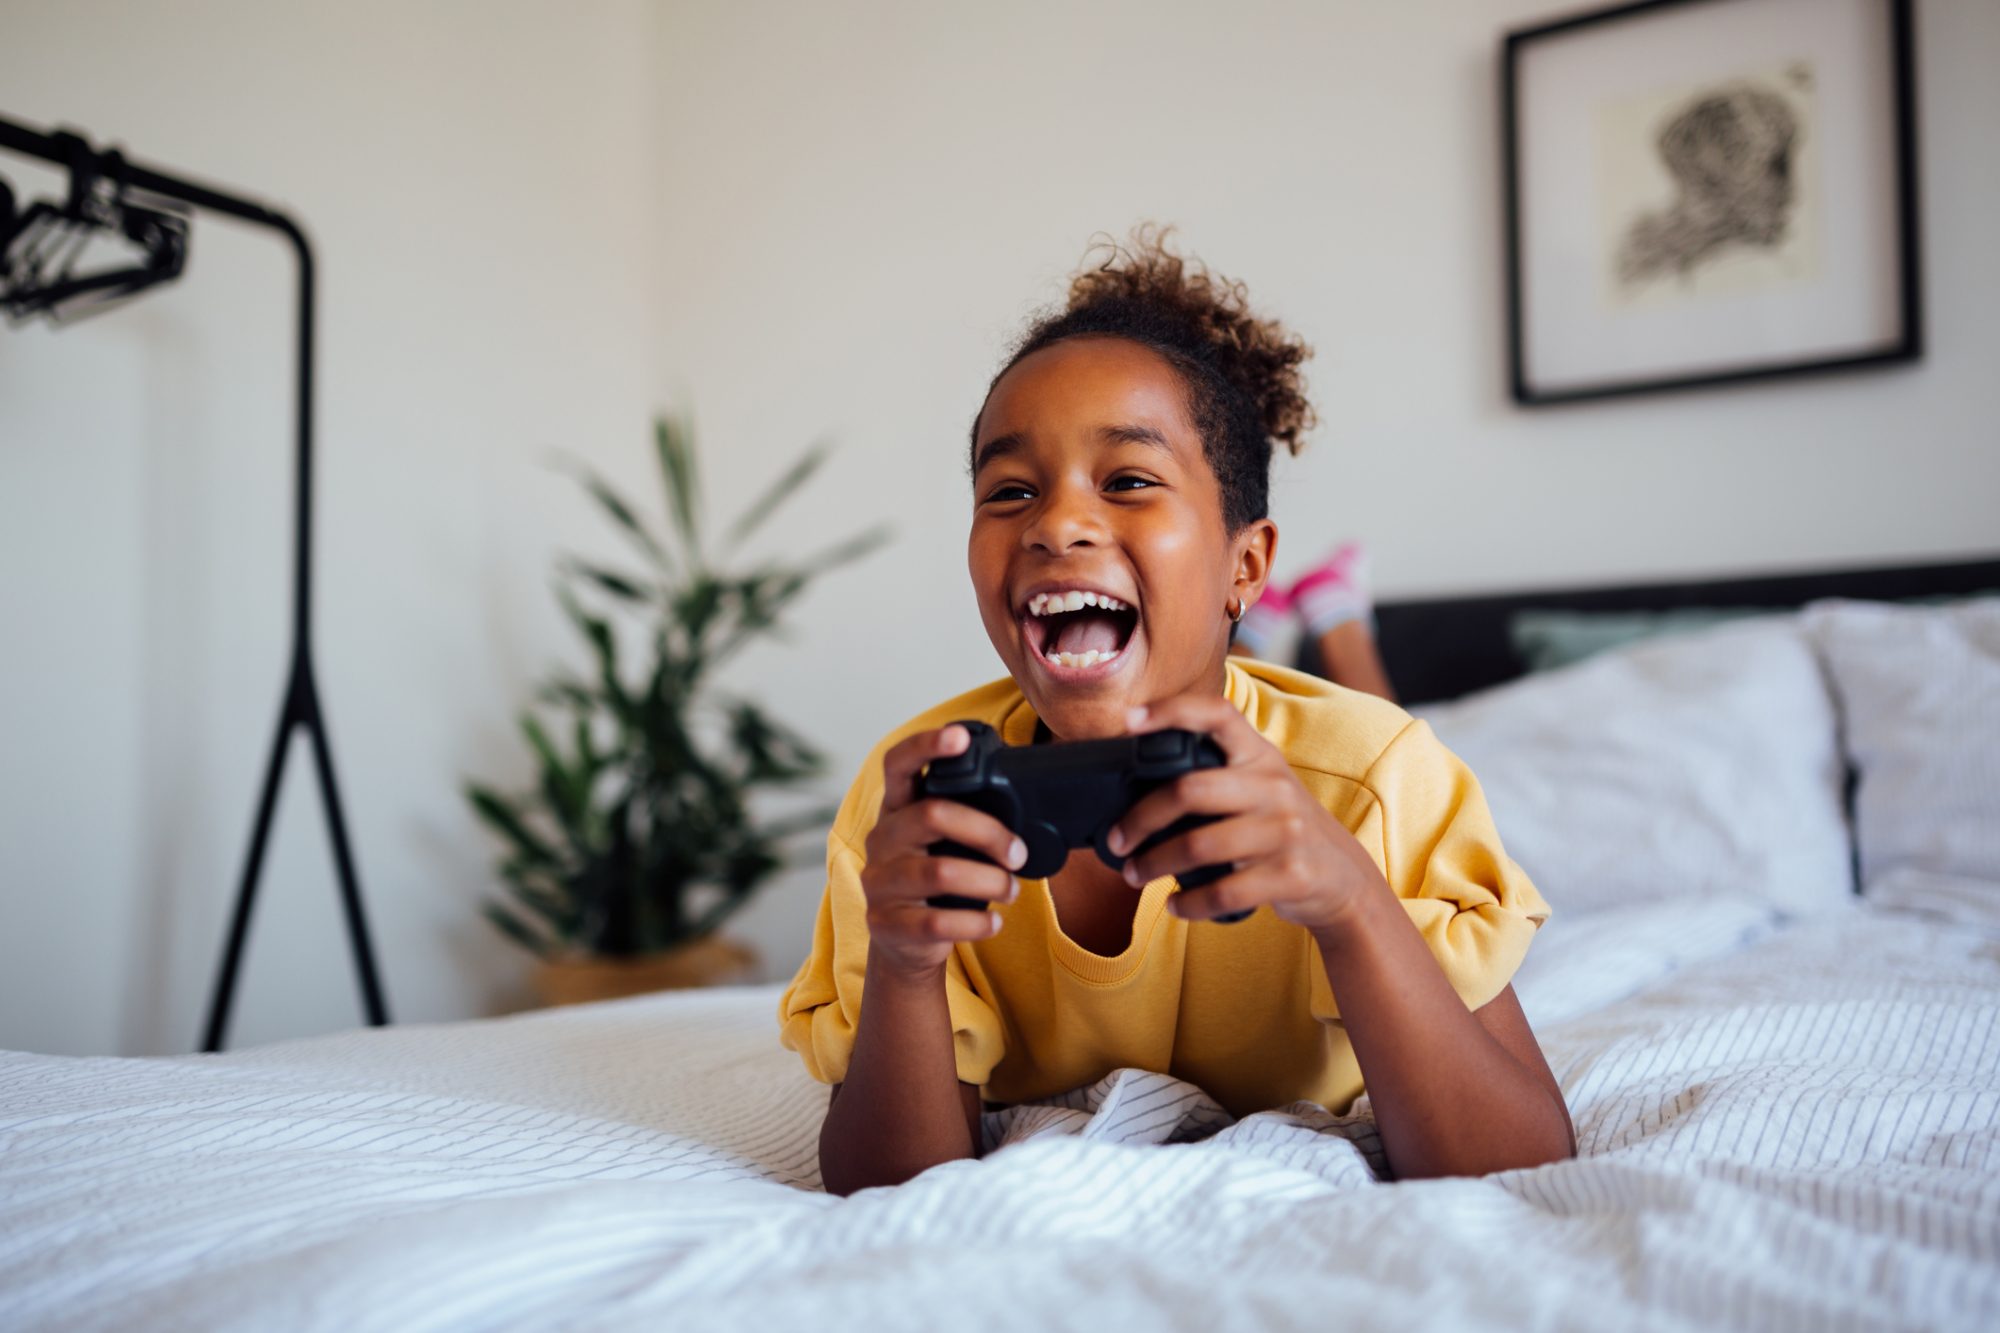 An image of a girl playing video games.